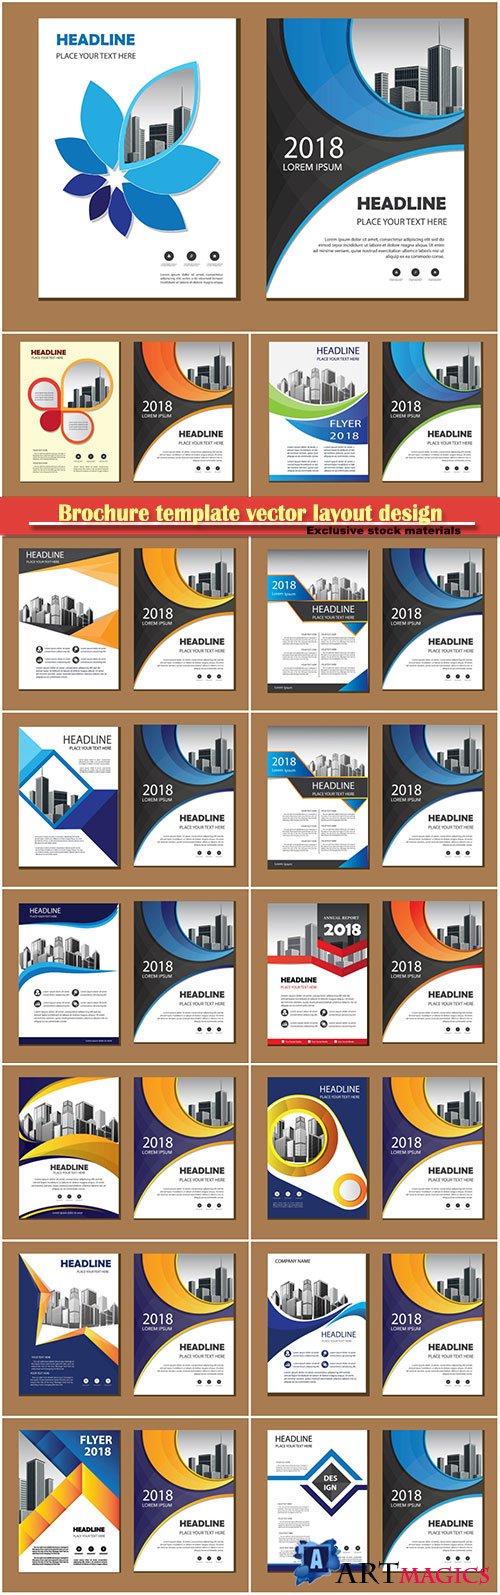 Brochure template vector layout design, corporate business annual report, magazine, flyer mockup # 174